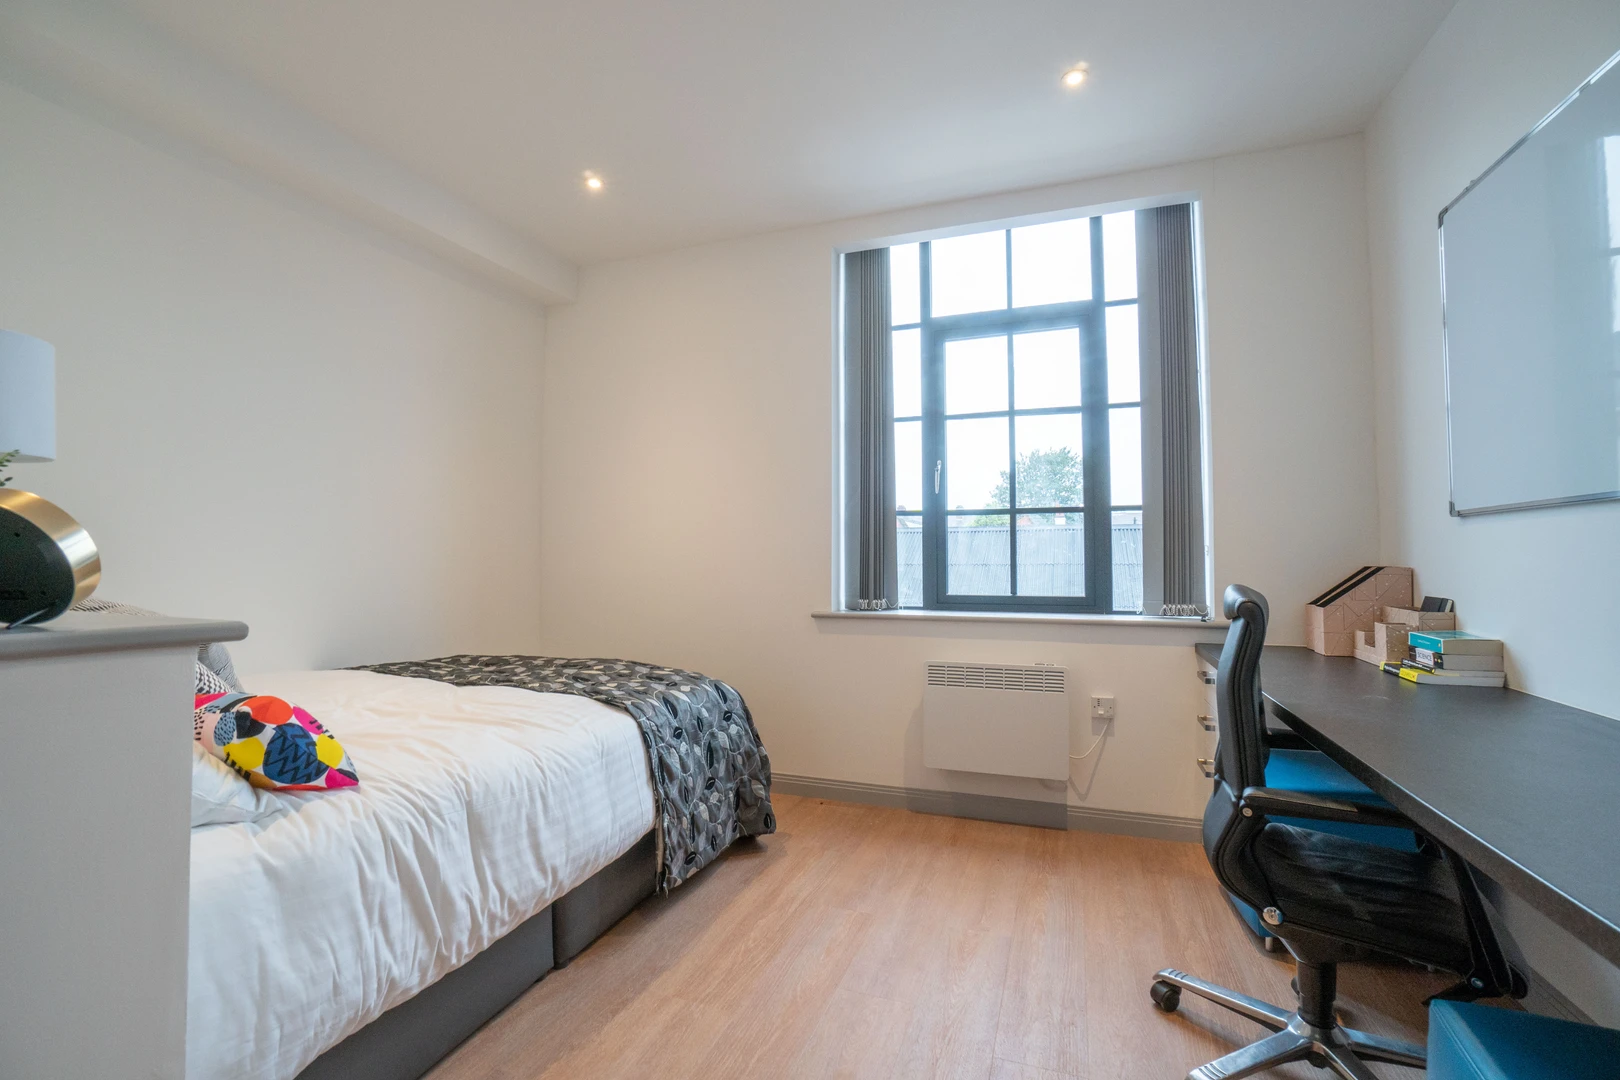 Room for rent in a shared flat in Leicester